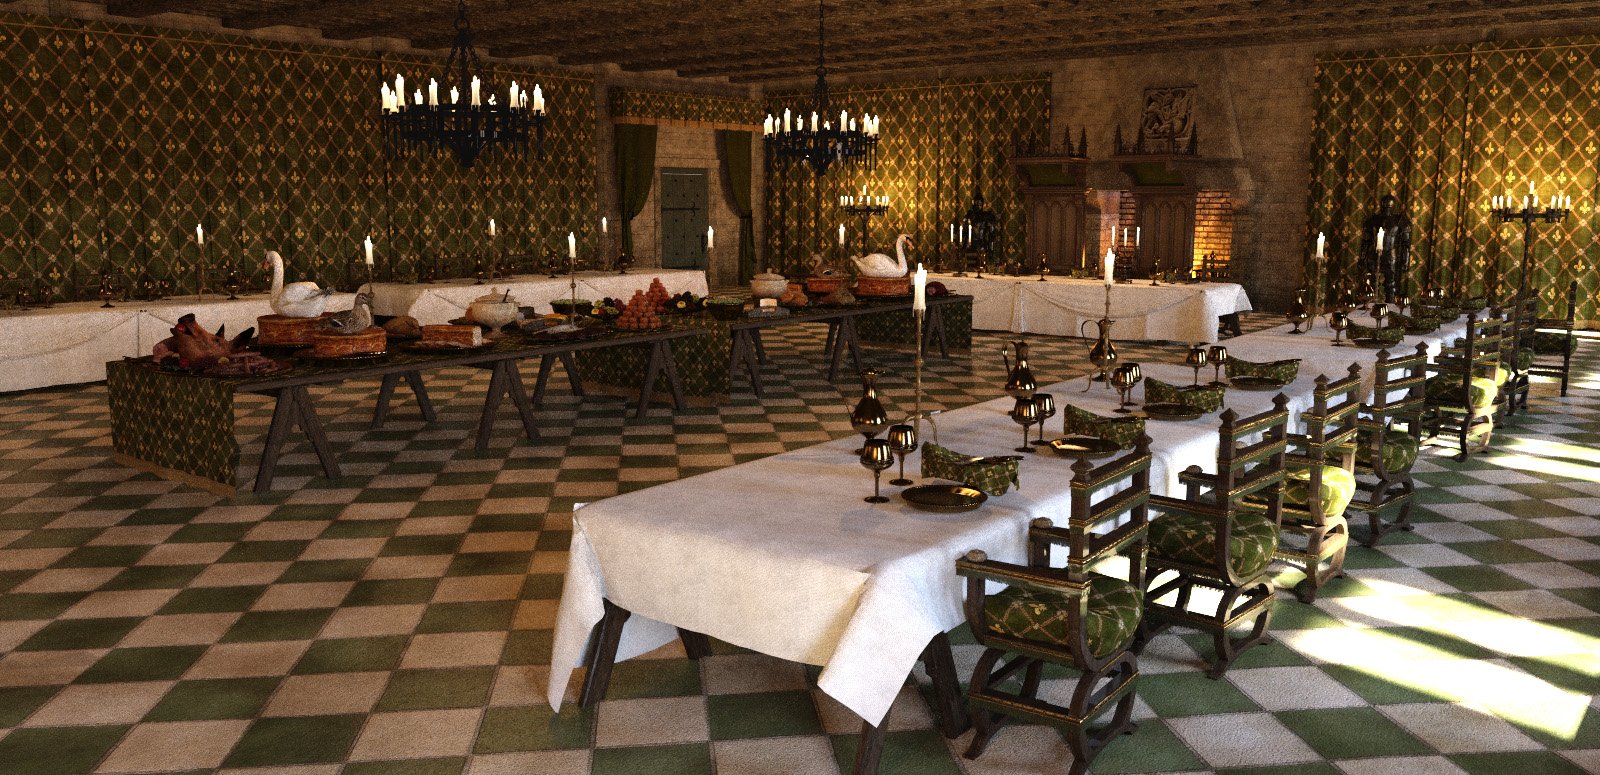 MICK-Banquet Hall by: Faveral, 3D Models by Daz 3D